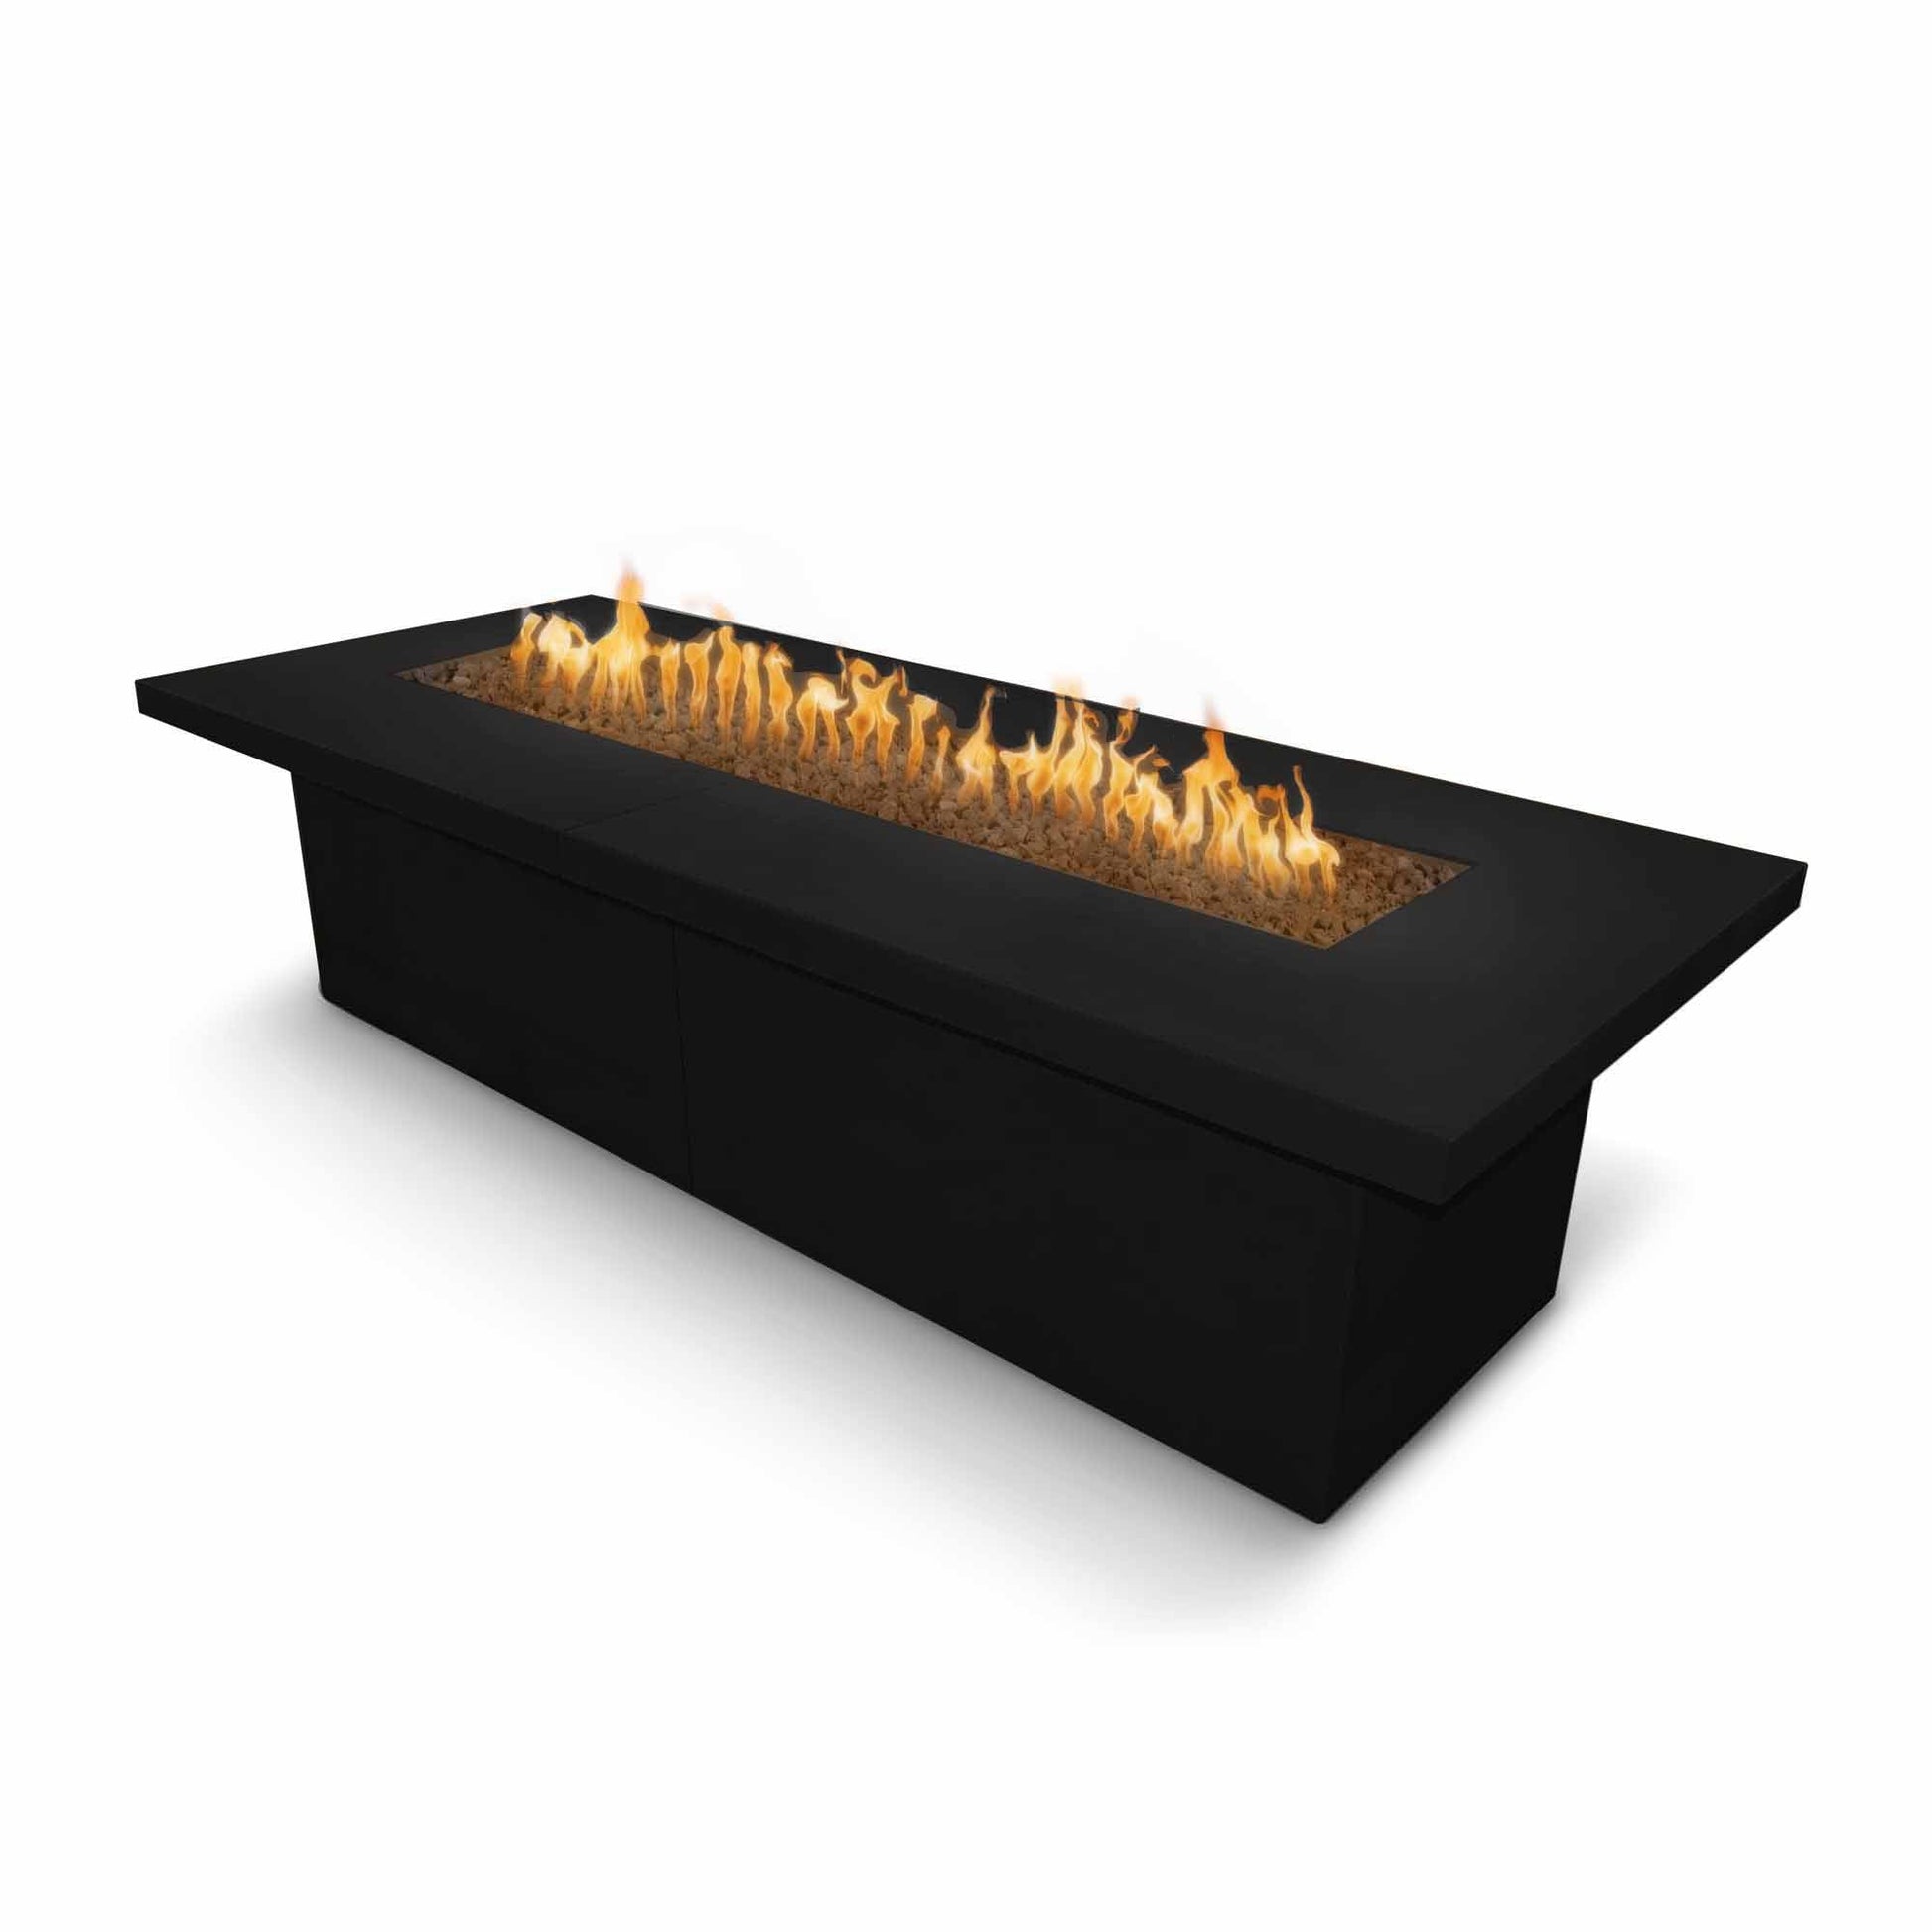 The Outdoor Plus Rectangular Newport 144" Java Powder Coated Metal Natural Gas Fire Pit with 110V Electronic Ignition